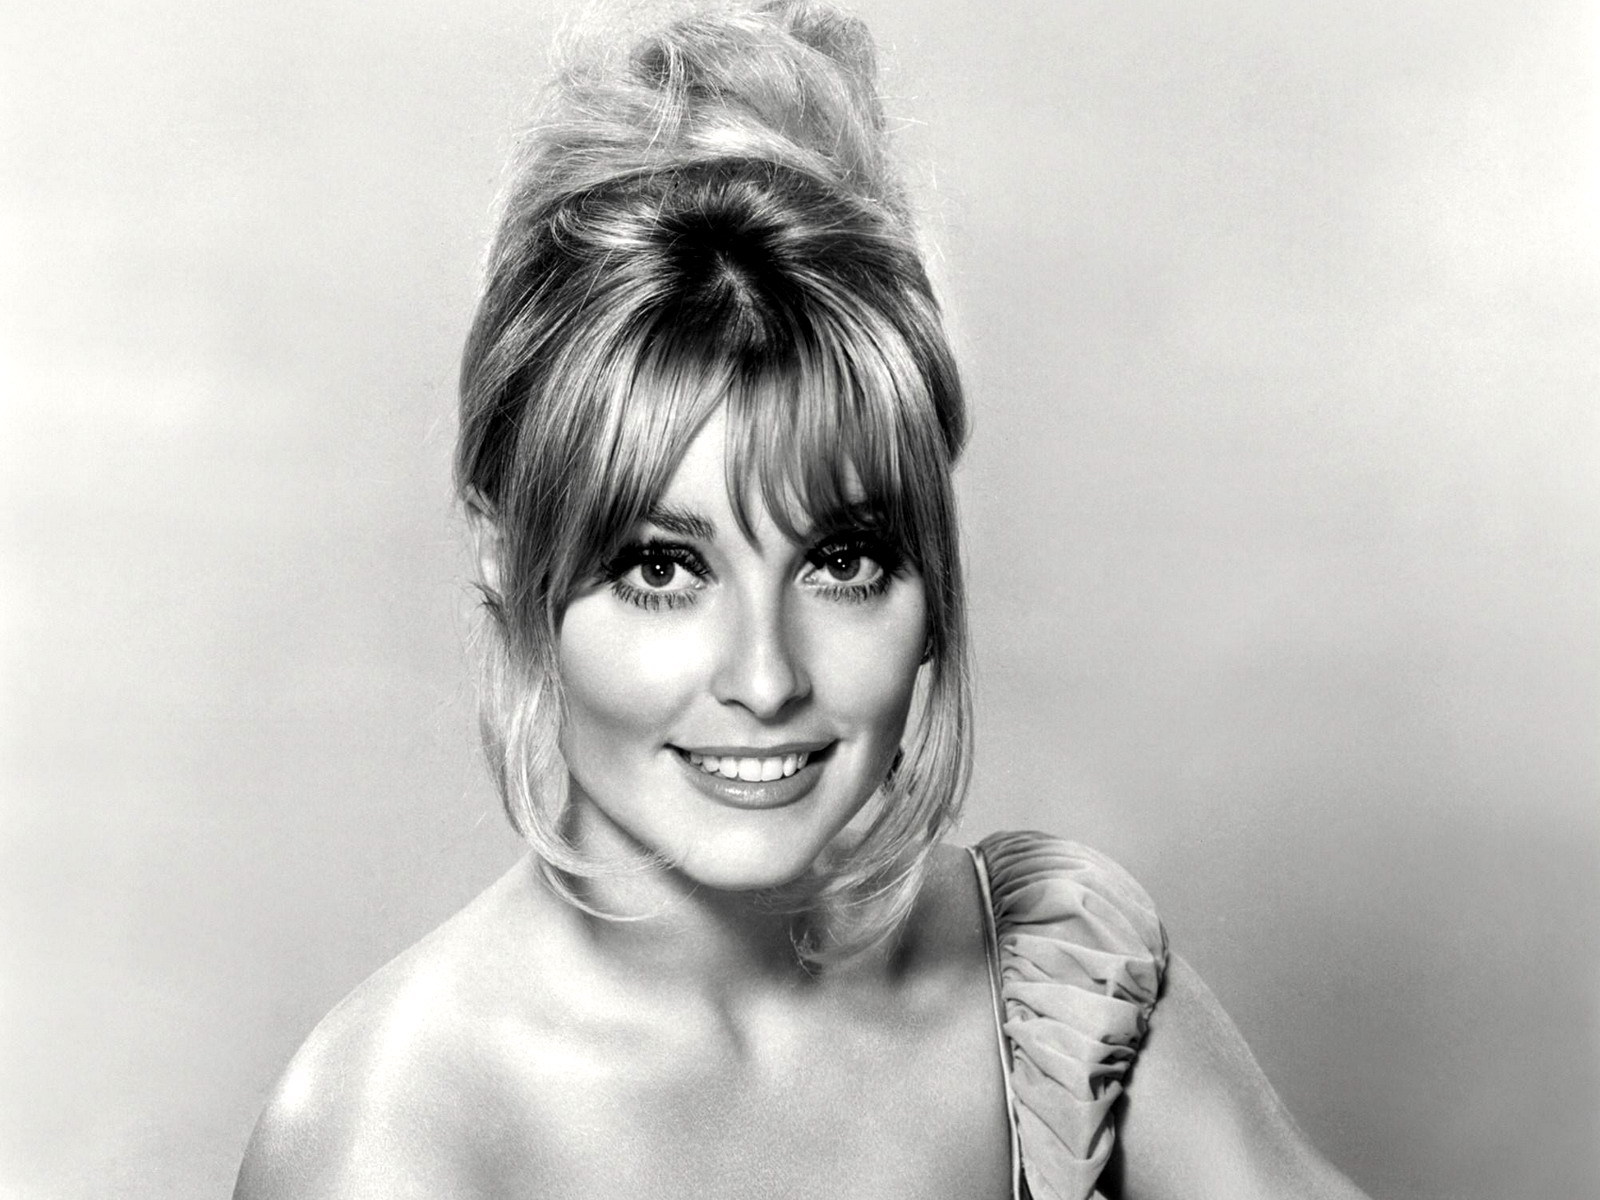 Sharon Tate Wallpaper Image Photos Pictures Background